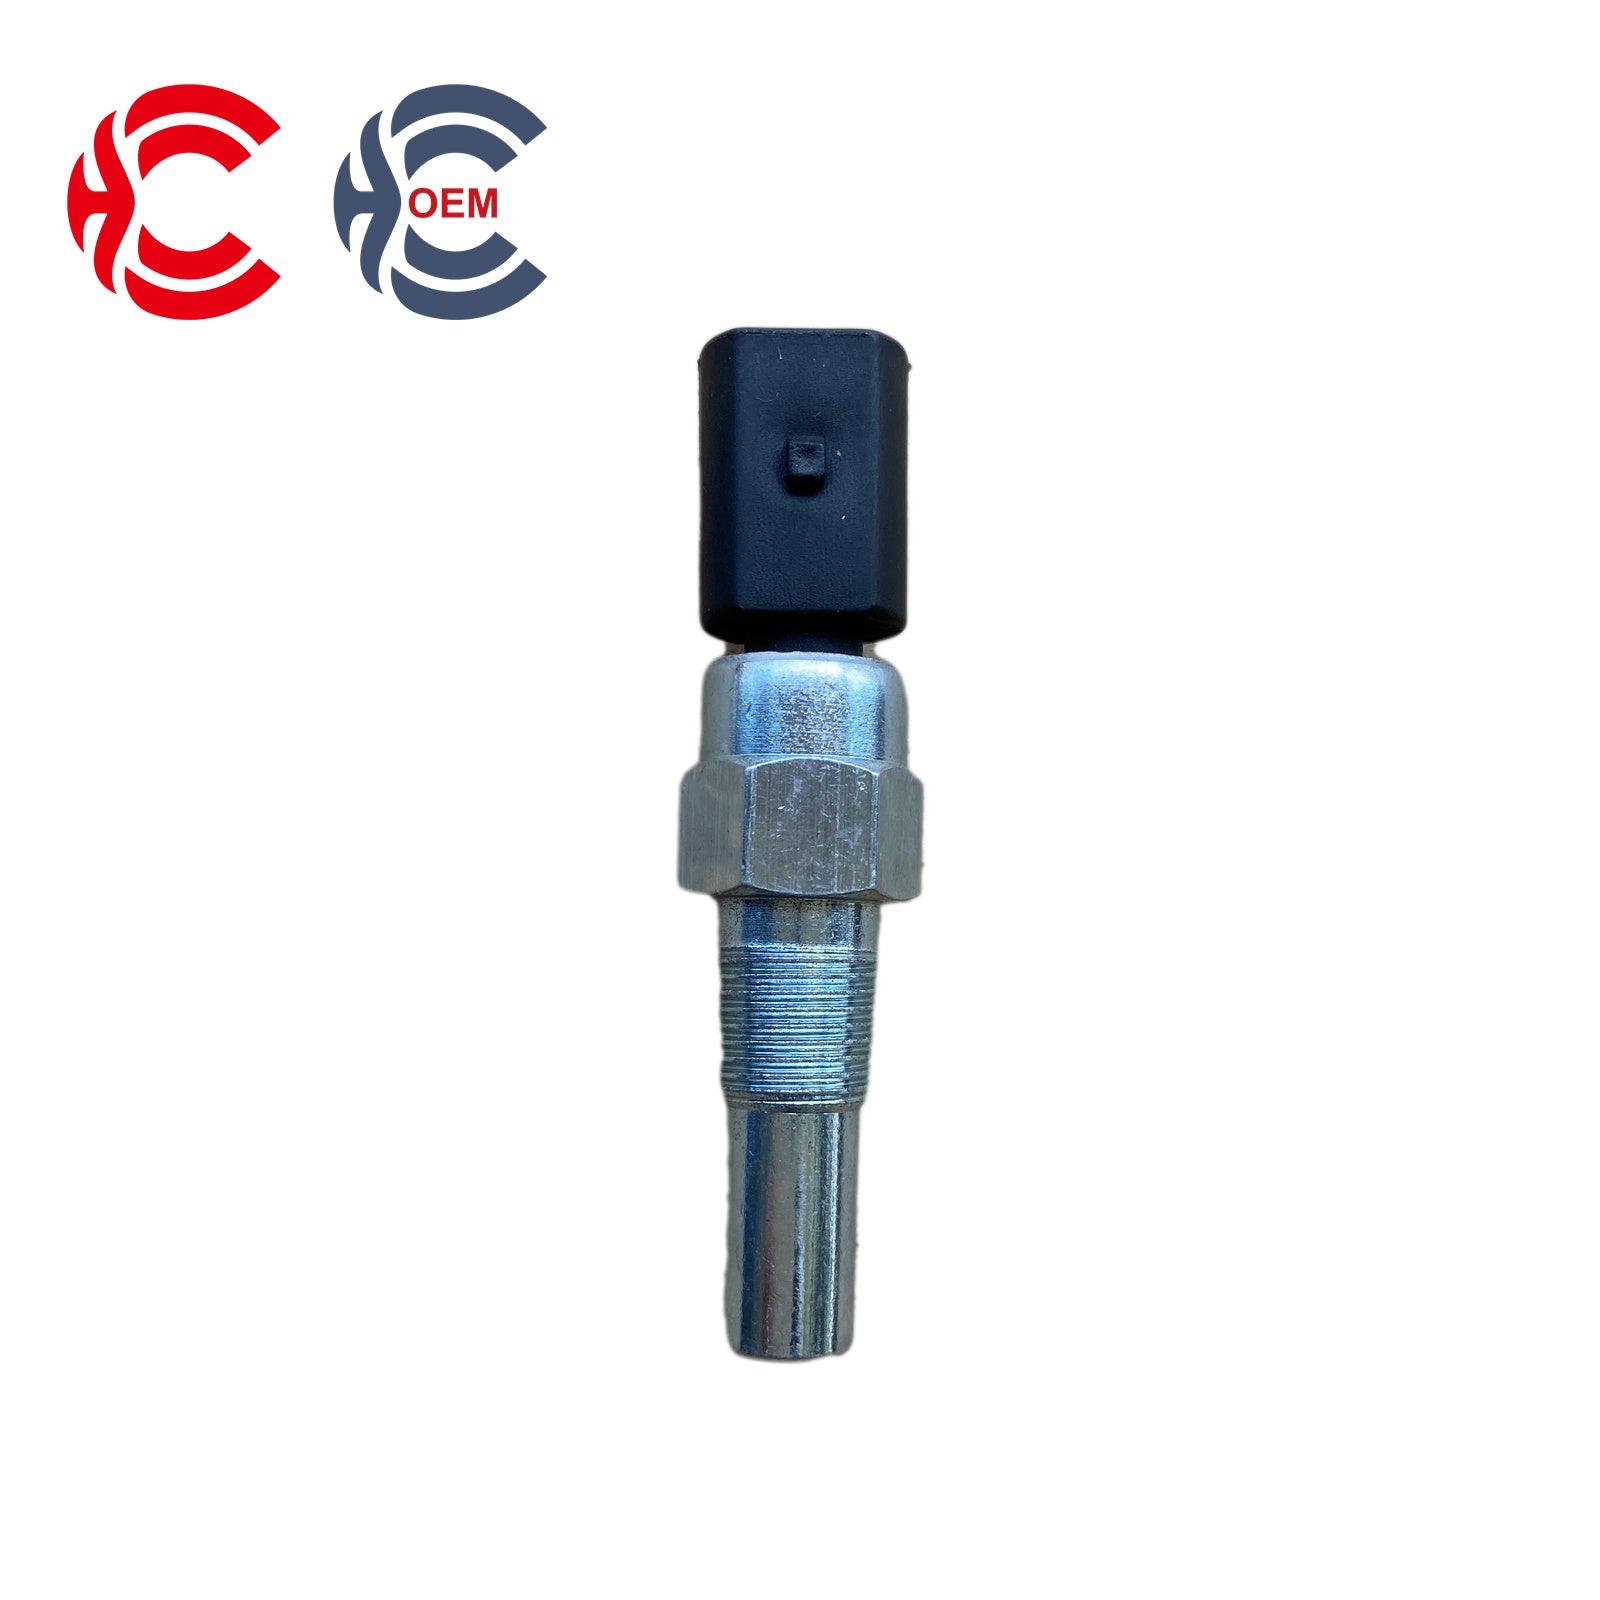 OEM: Woodward Fuel Temperature SensorMaterial: ABS metalColor: black silverOrigin: Made in ChinaWeight: 50gPacking List: 1* Fuel Temperature Sensor More ServiceWe can provide OEM Manufacturing serviceWe can Be your one-step solution for Auto PartsWe can provide technical scheme for you Feel Free to Contact Us, We will get back to you as soon as possible.